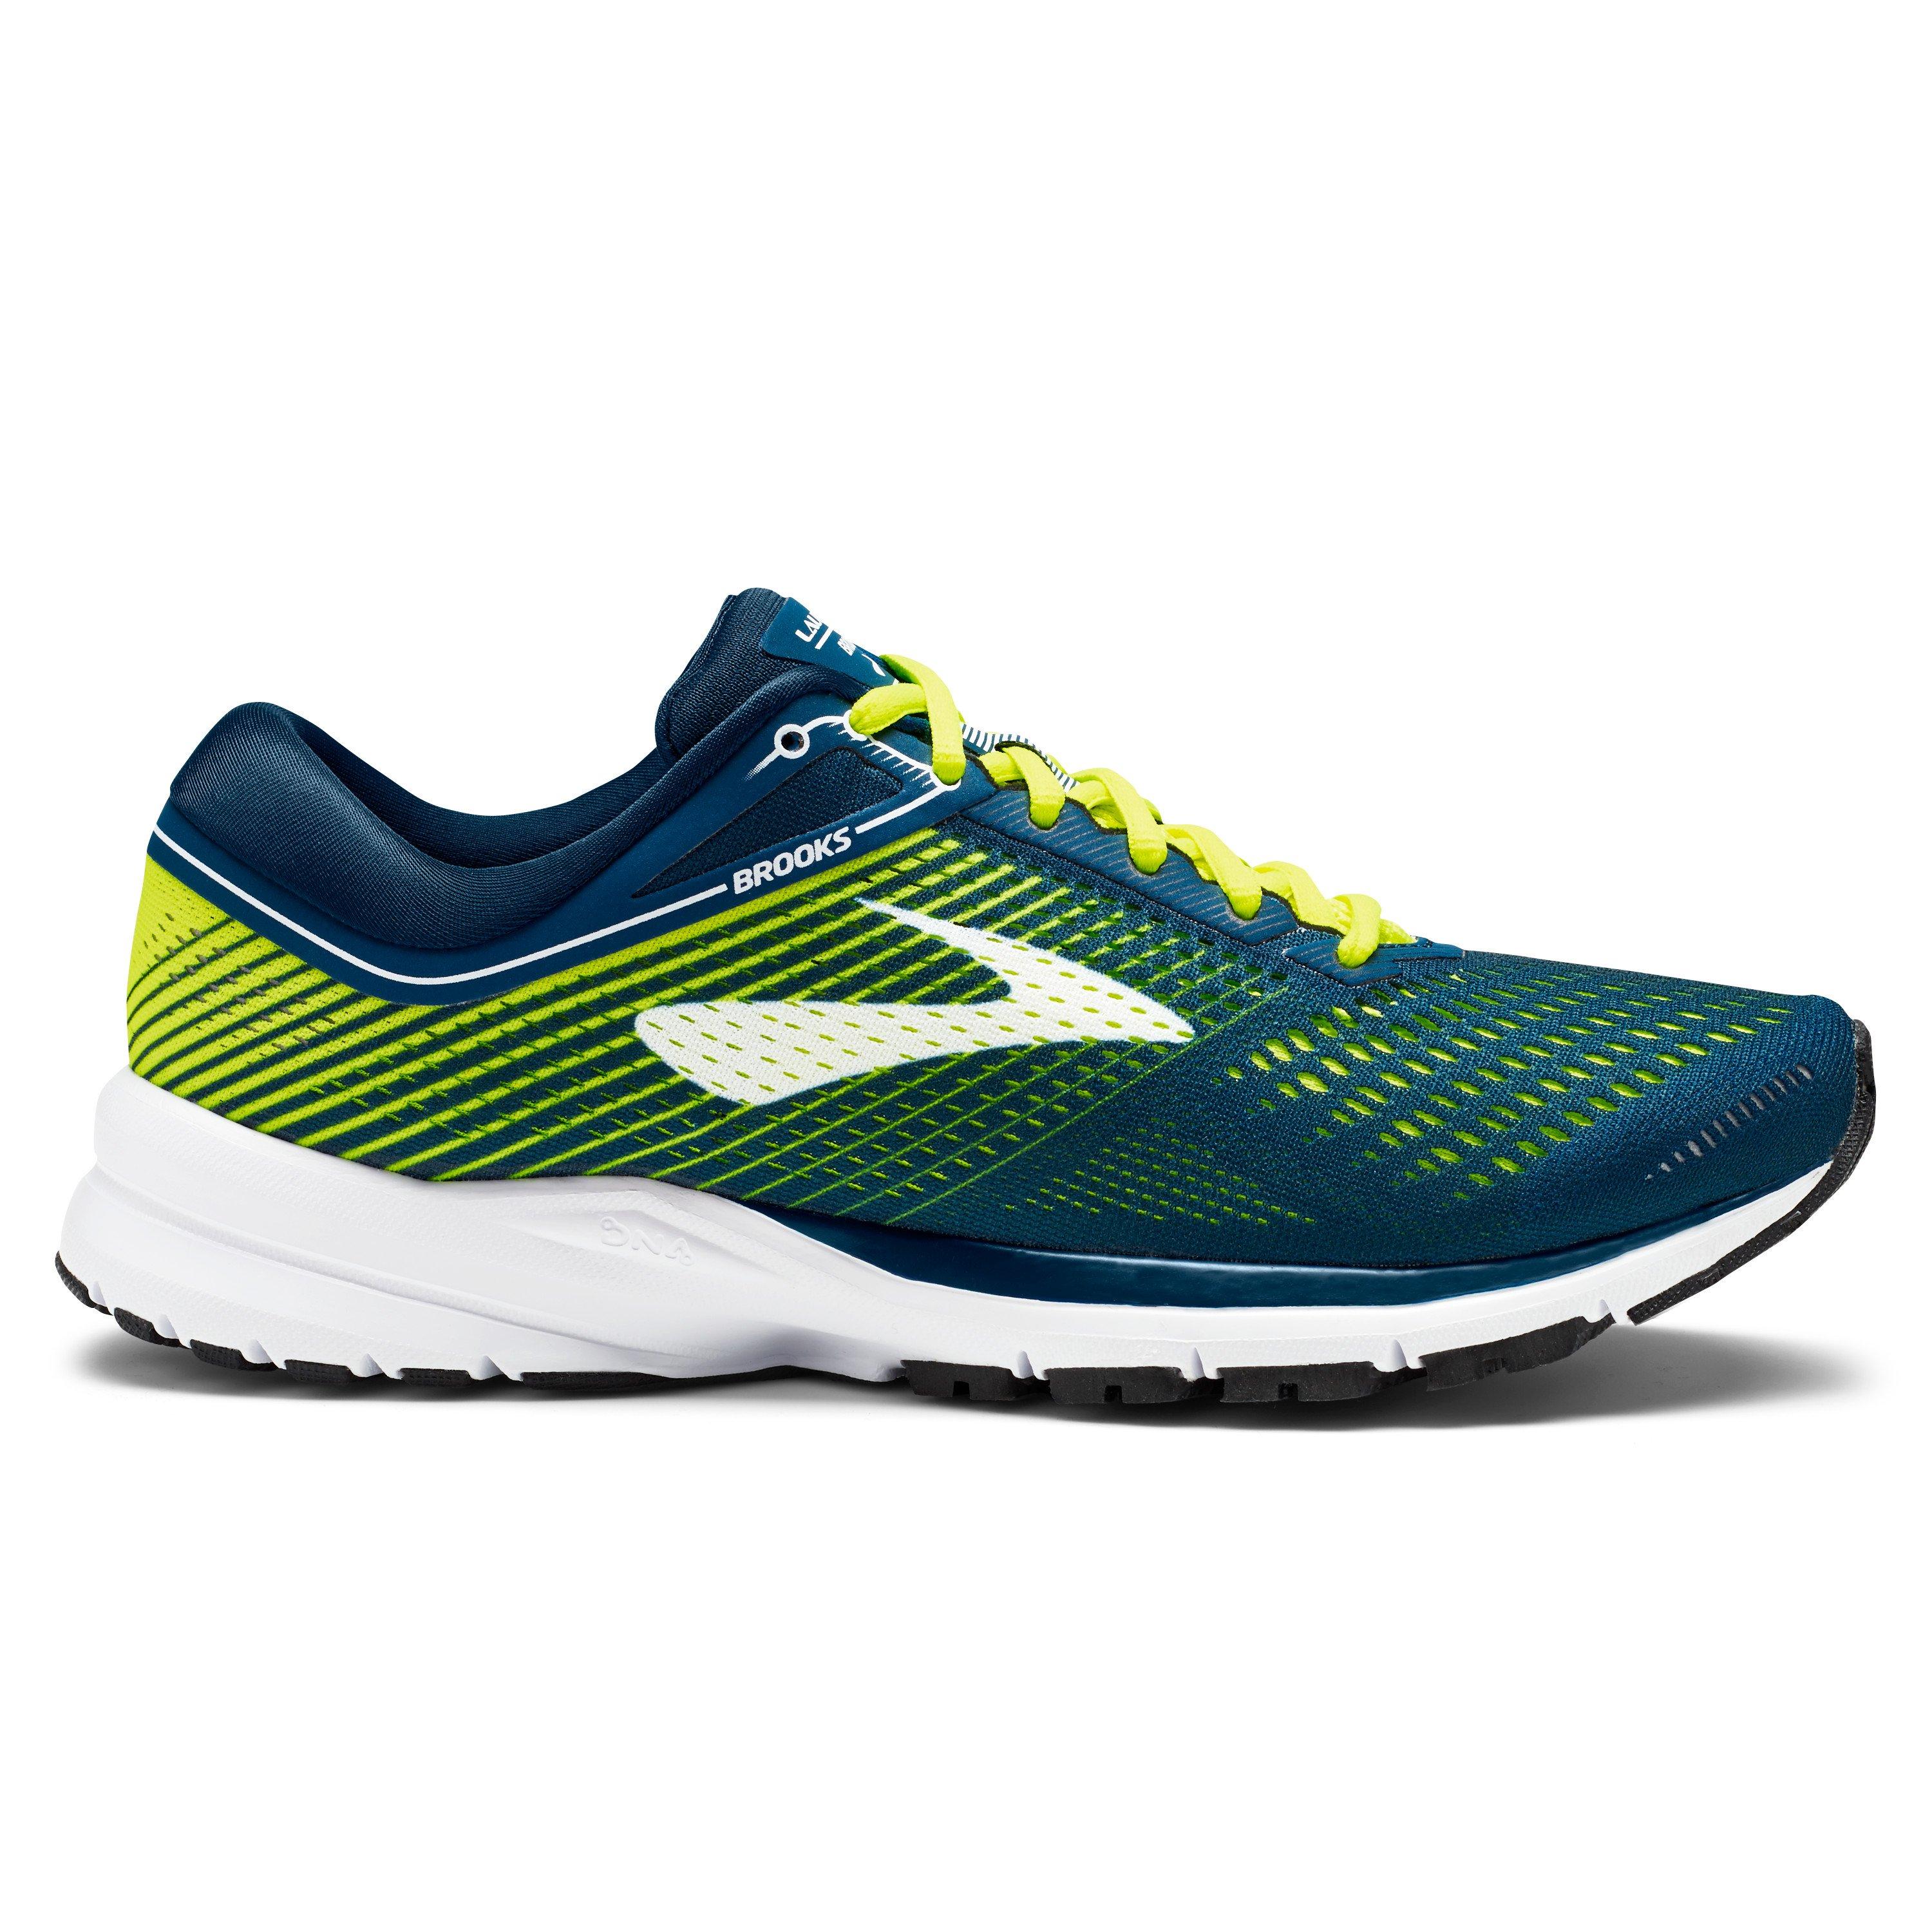 brooks womens shoes launch 5